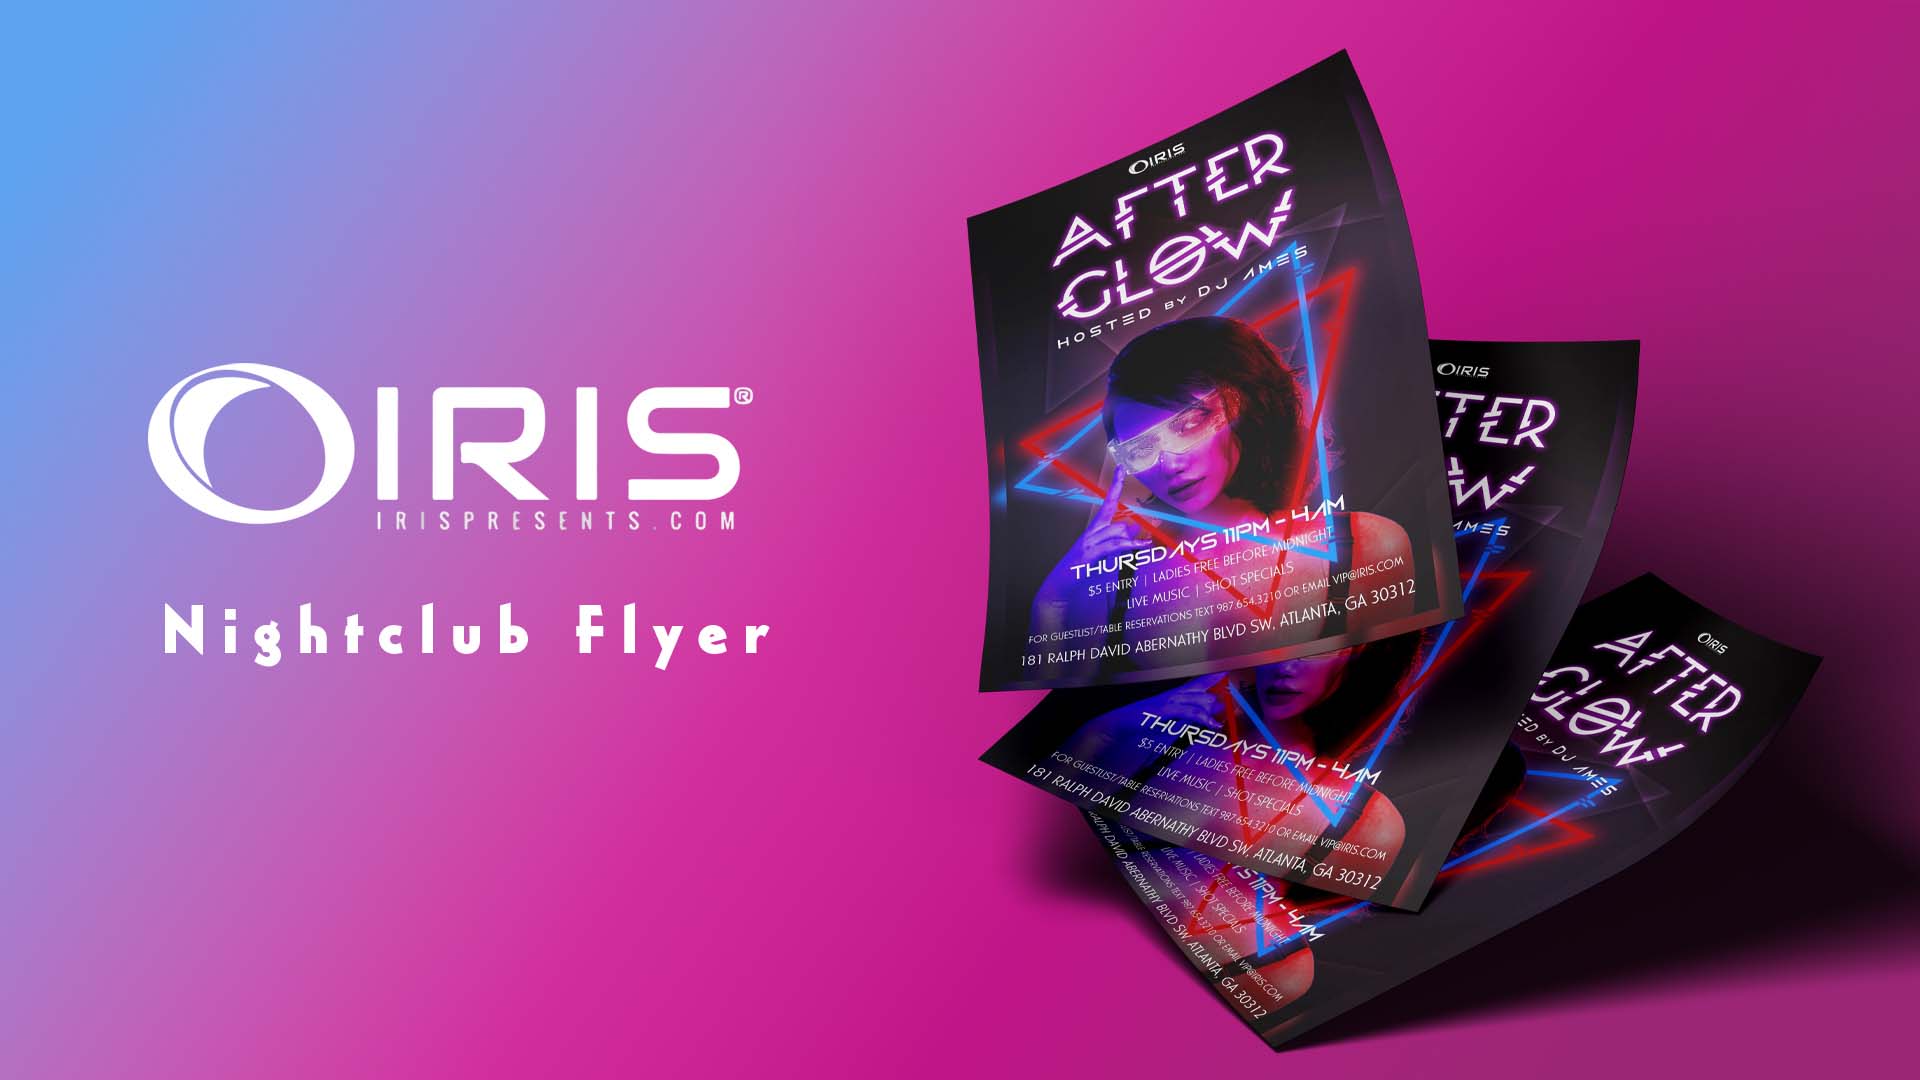  / “AFTERGLOW” Nightclub Flyer, 4”x7” print flyer, 2021. This flyer advertises a local nightclub event, while maintaining hierarchy and keeping the viewer engaged."